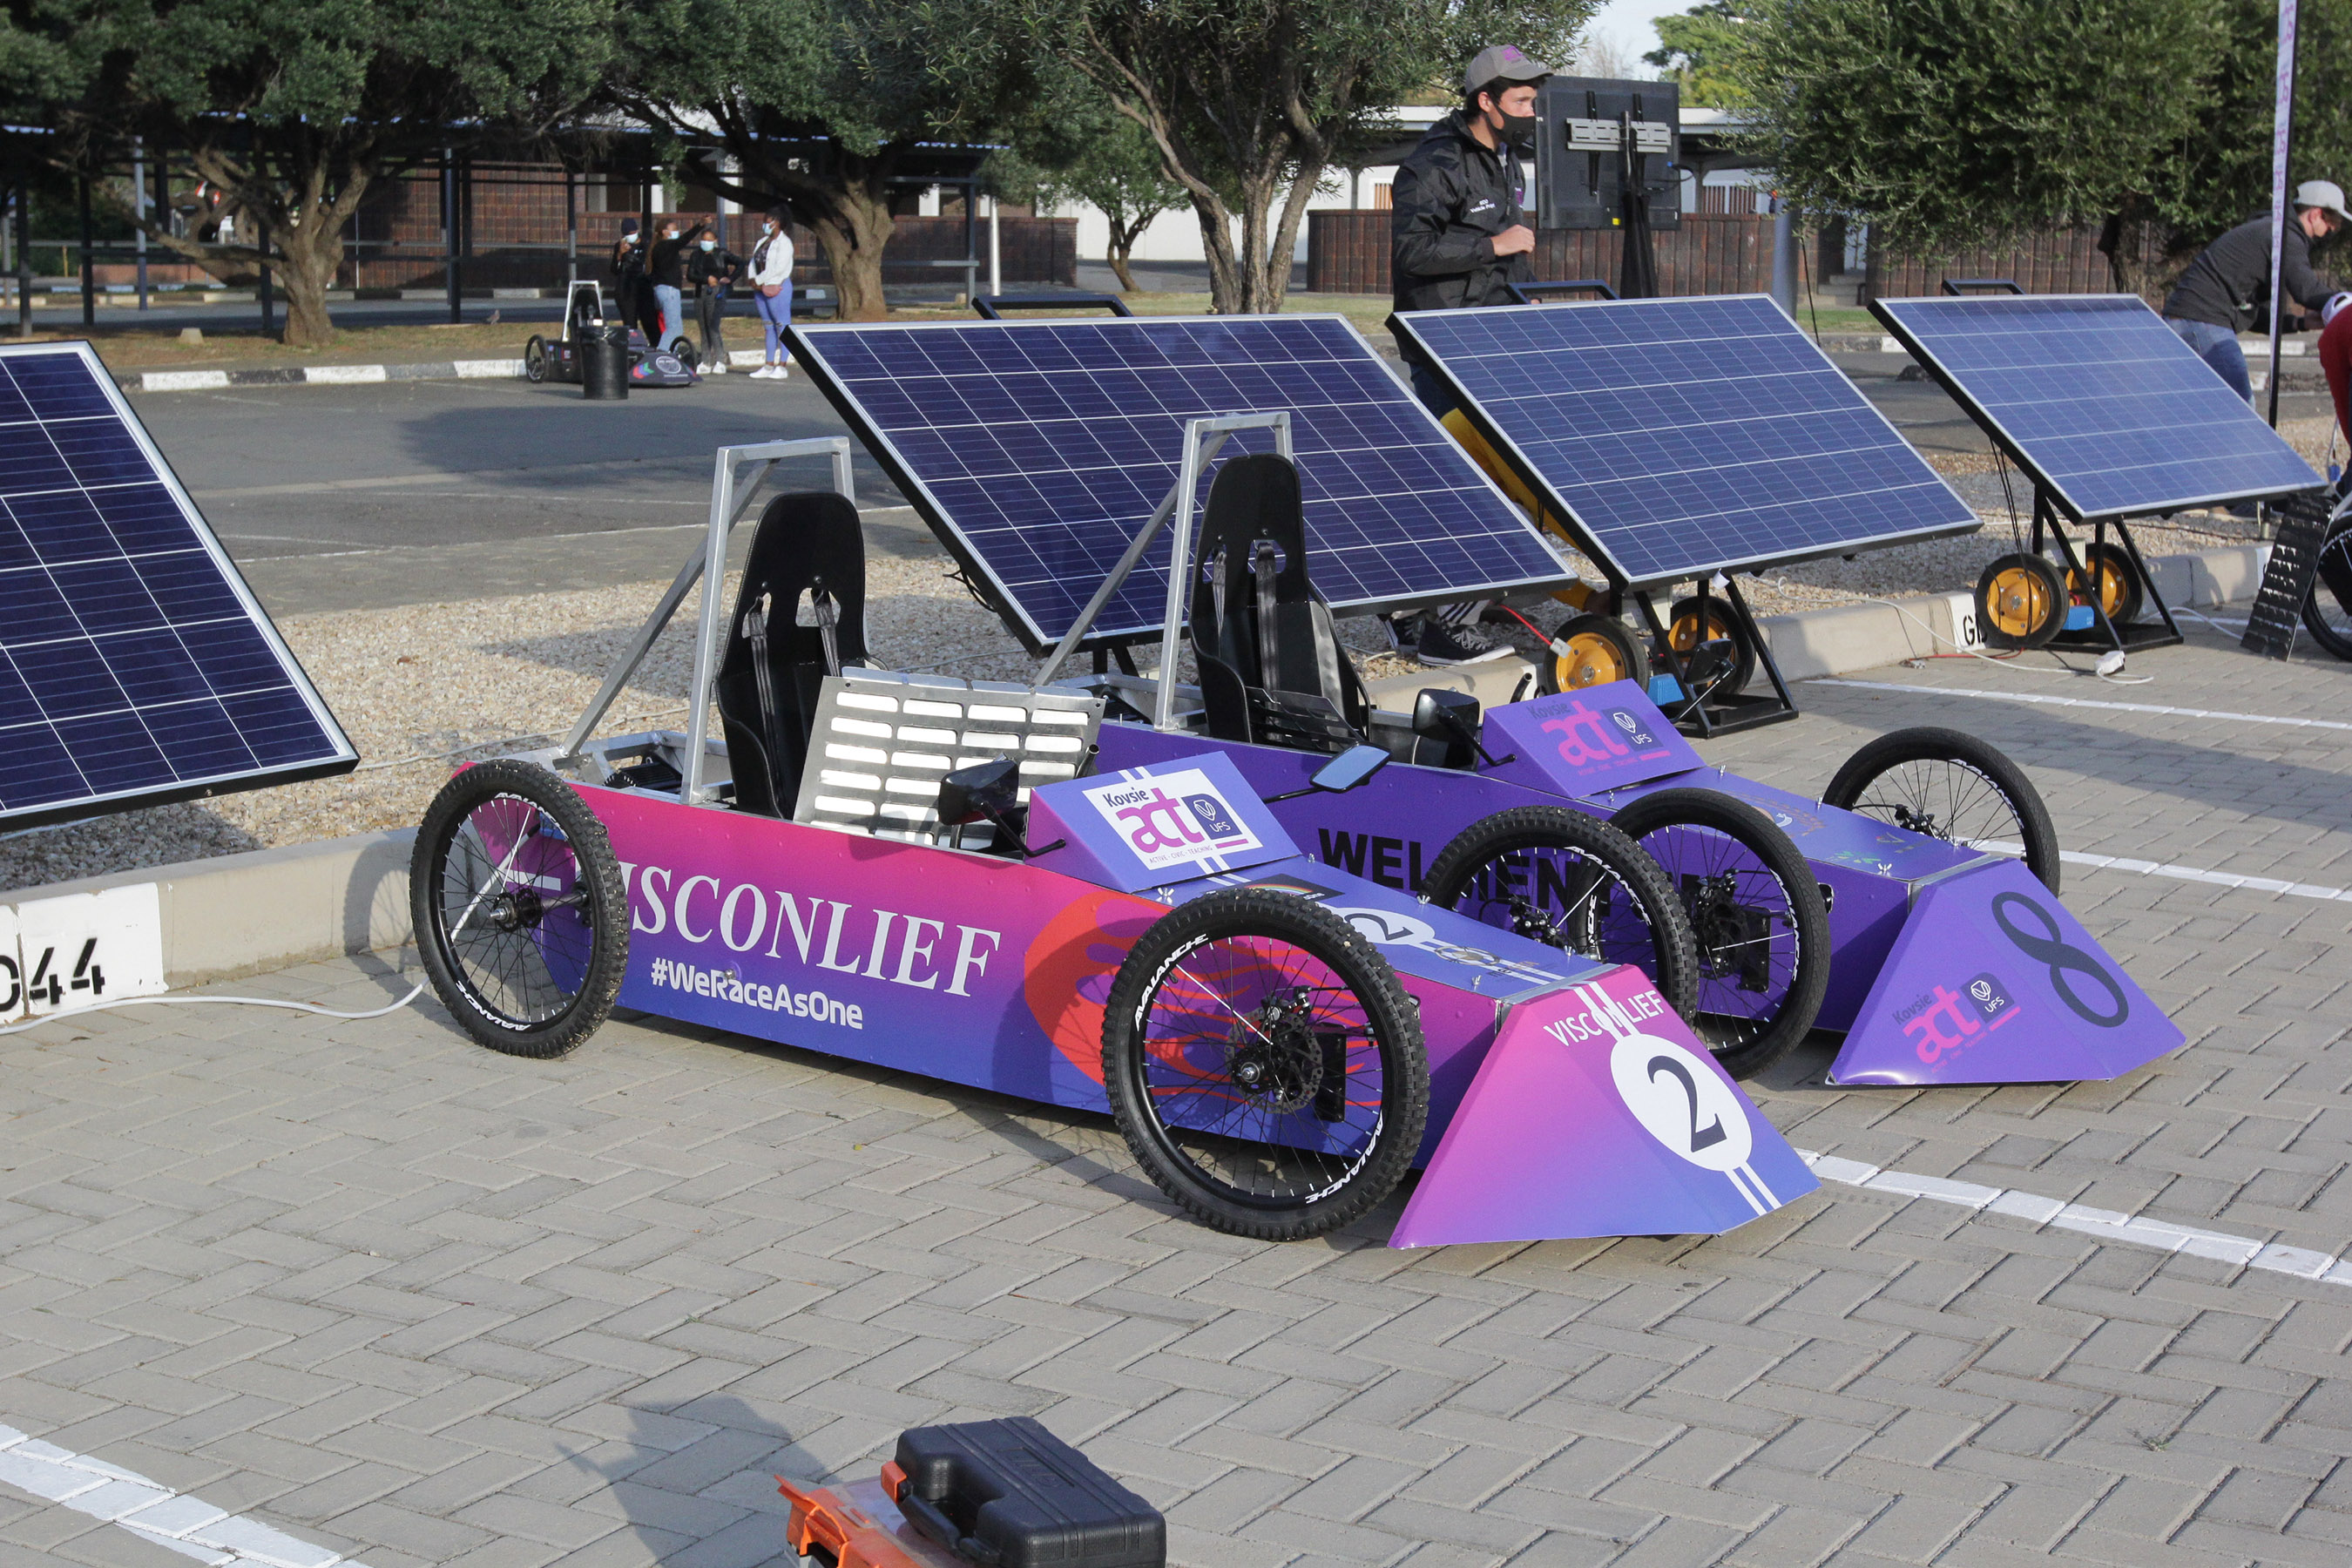 Two Eco-vehicles with solar panels